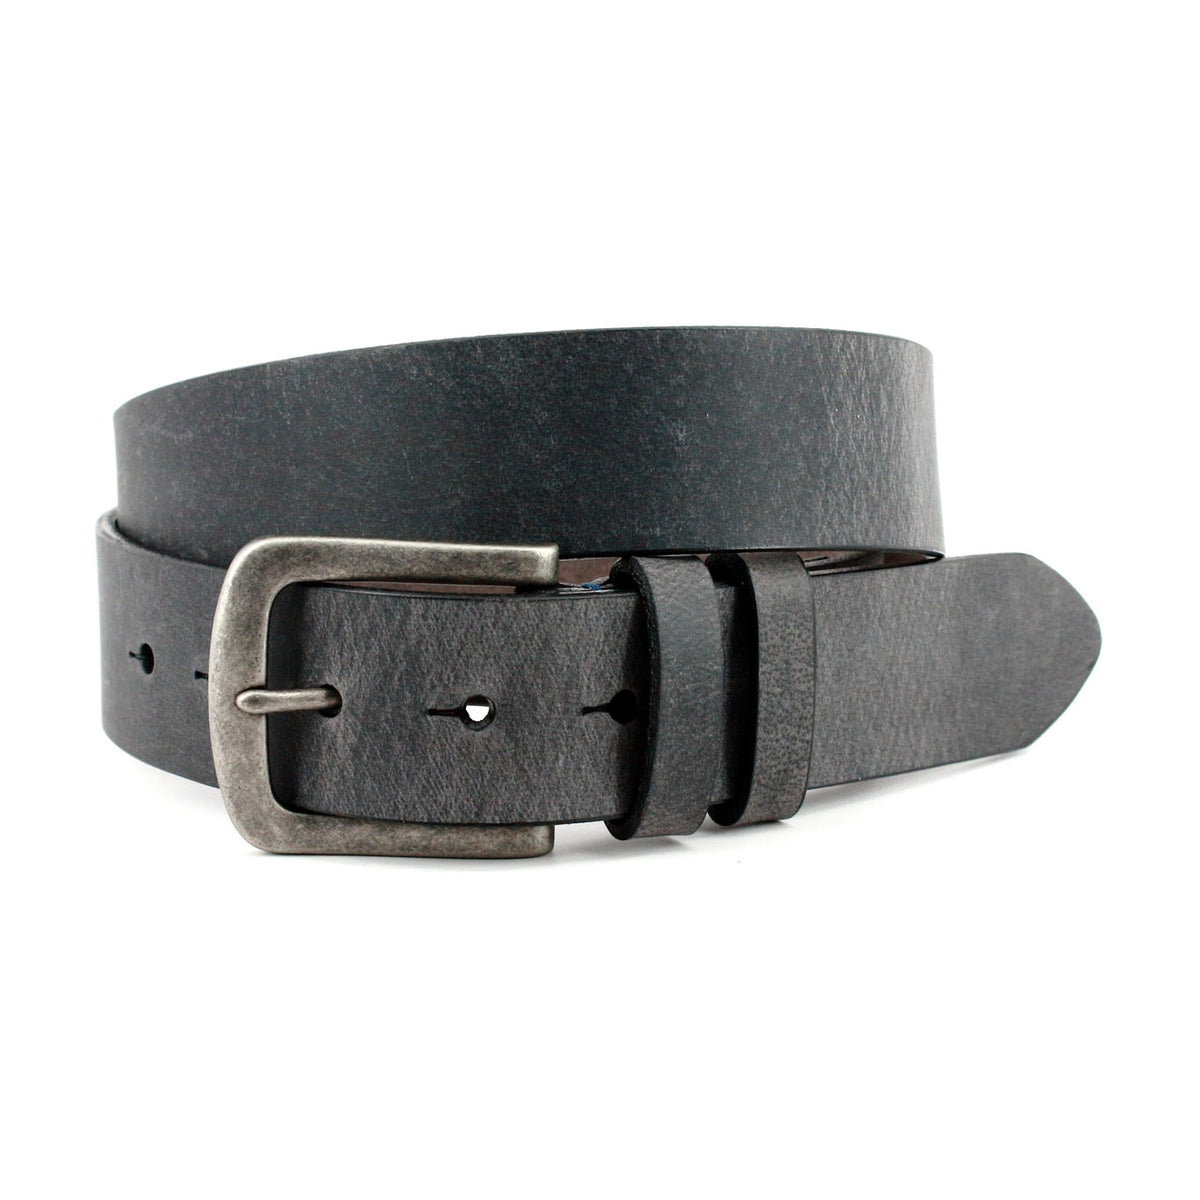 Distressed Waxed Harness Leather Belt - Charcoal